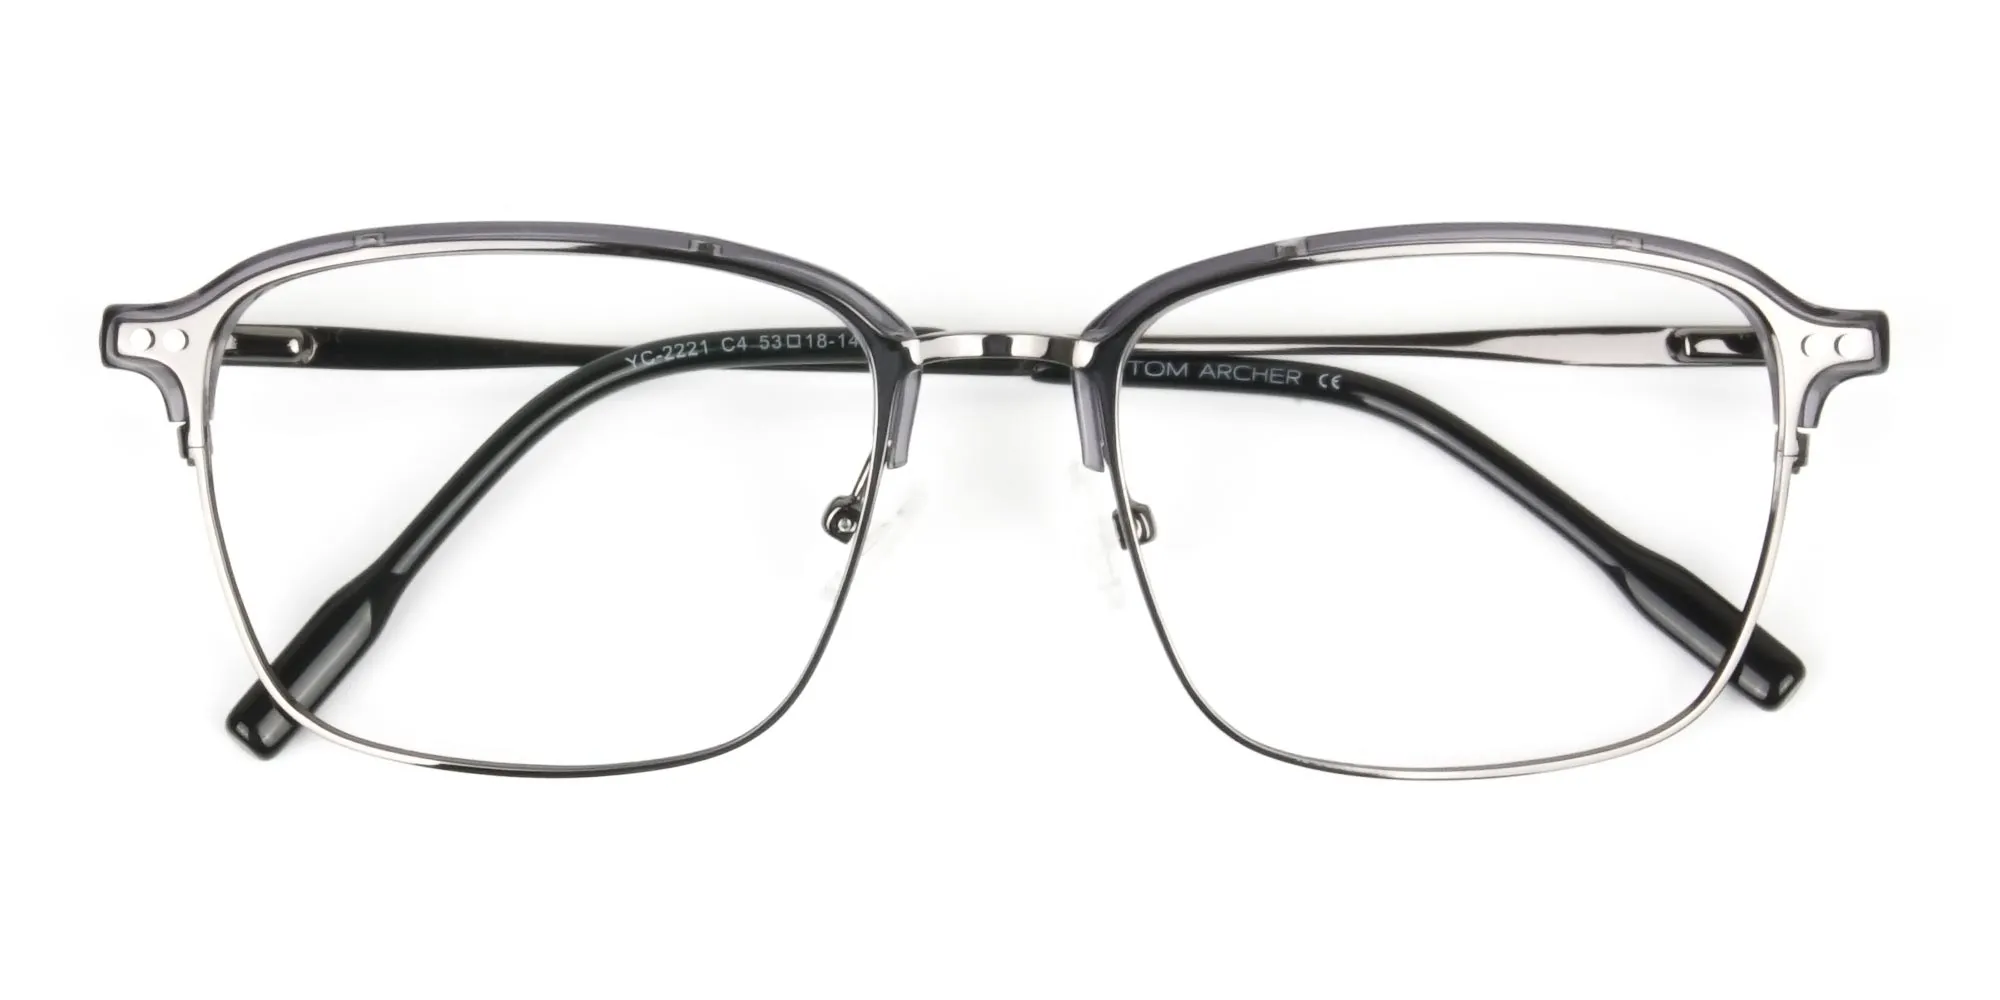 Gunmetal and Translucent Grey clubmaster glasses - 2